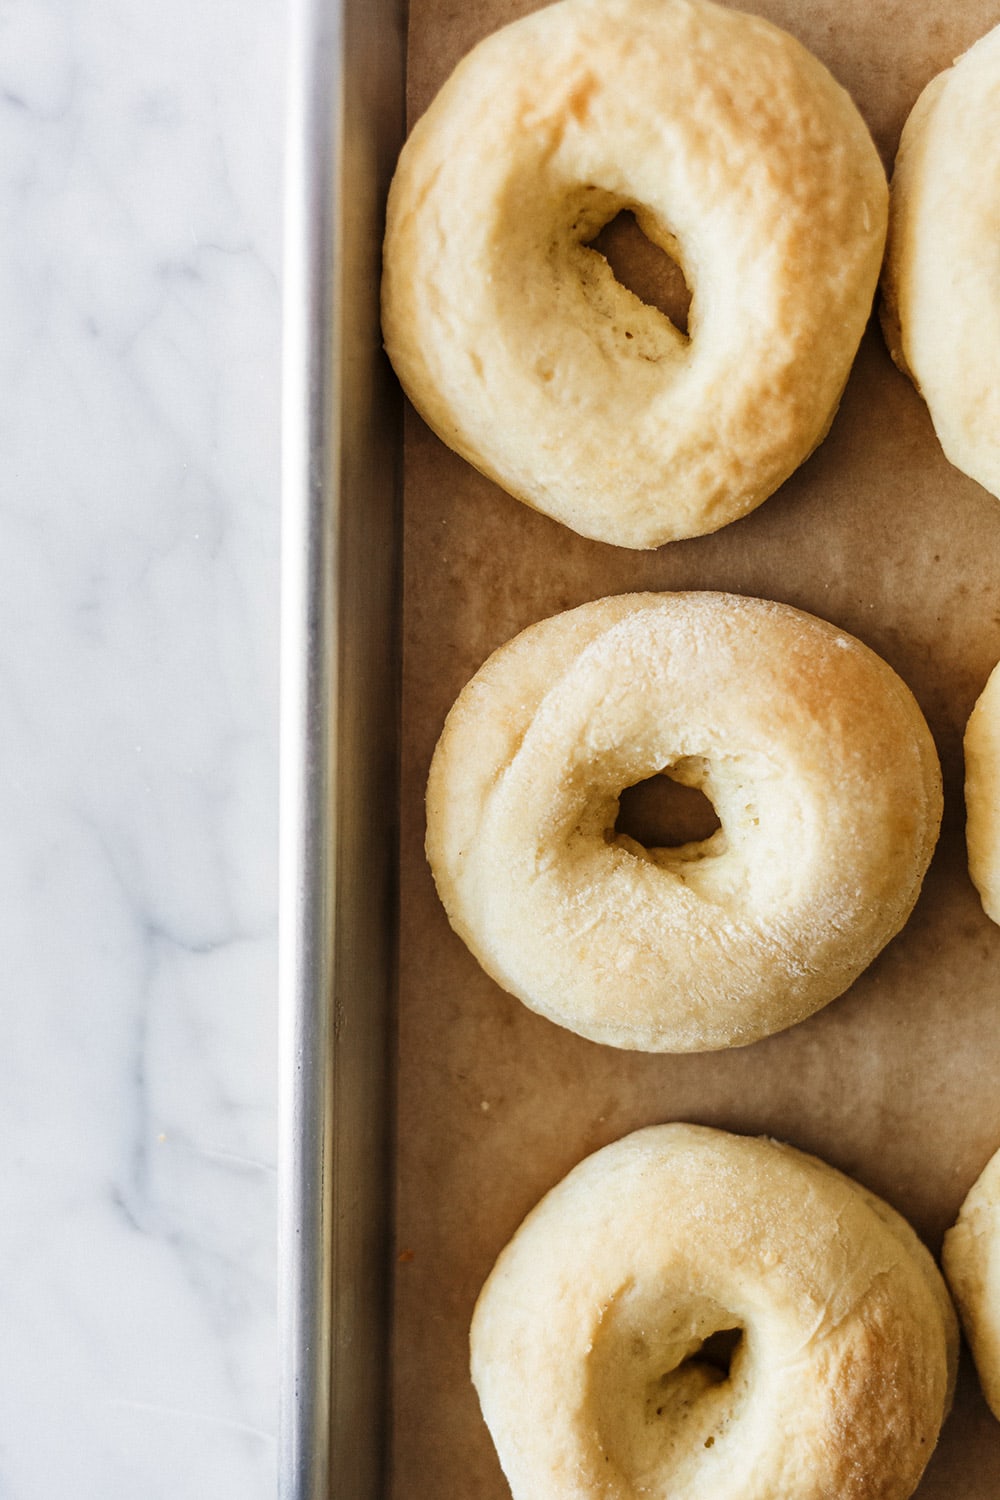 Baked Apple Pie Doughnuts are made with yeast-raised dough that bakes up just as light and fluffy as fried doughnuts but without the mess! Tasty fall treat.